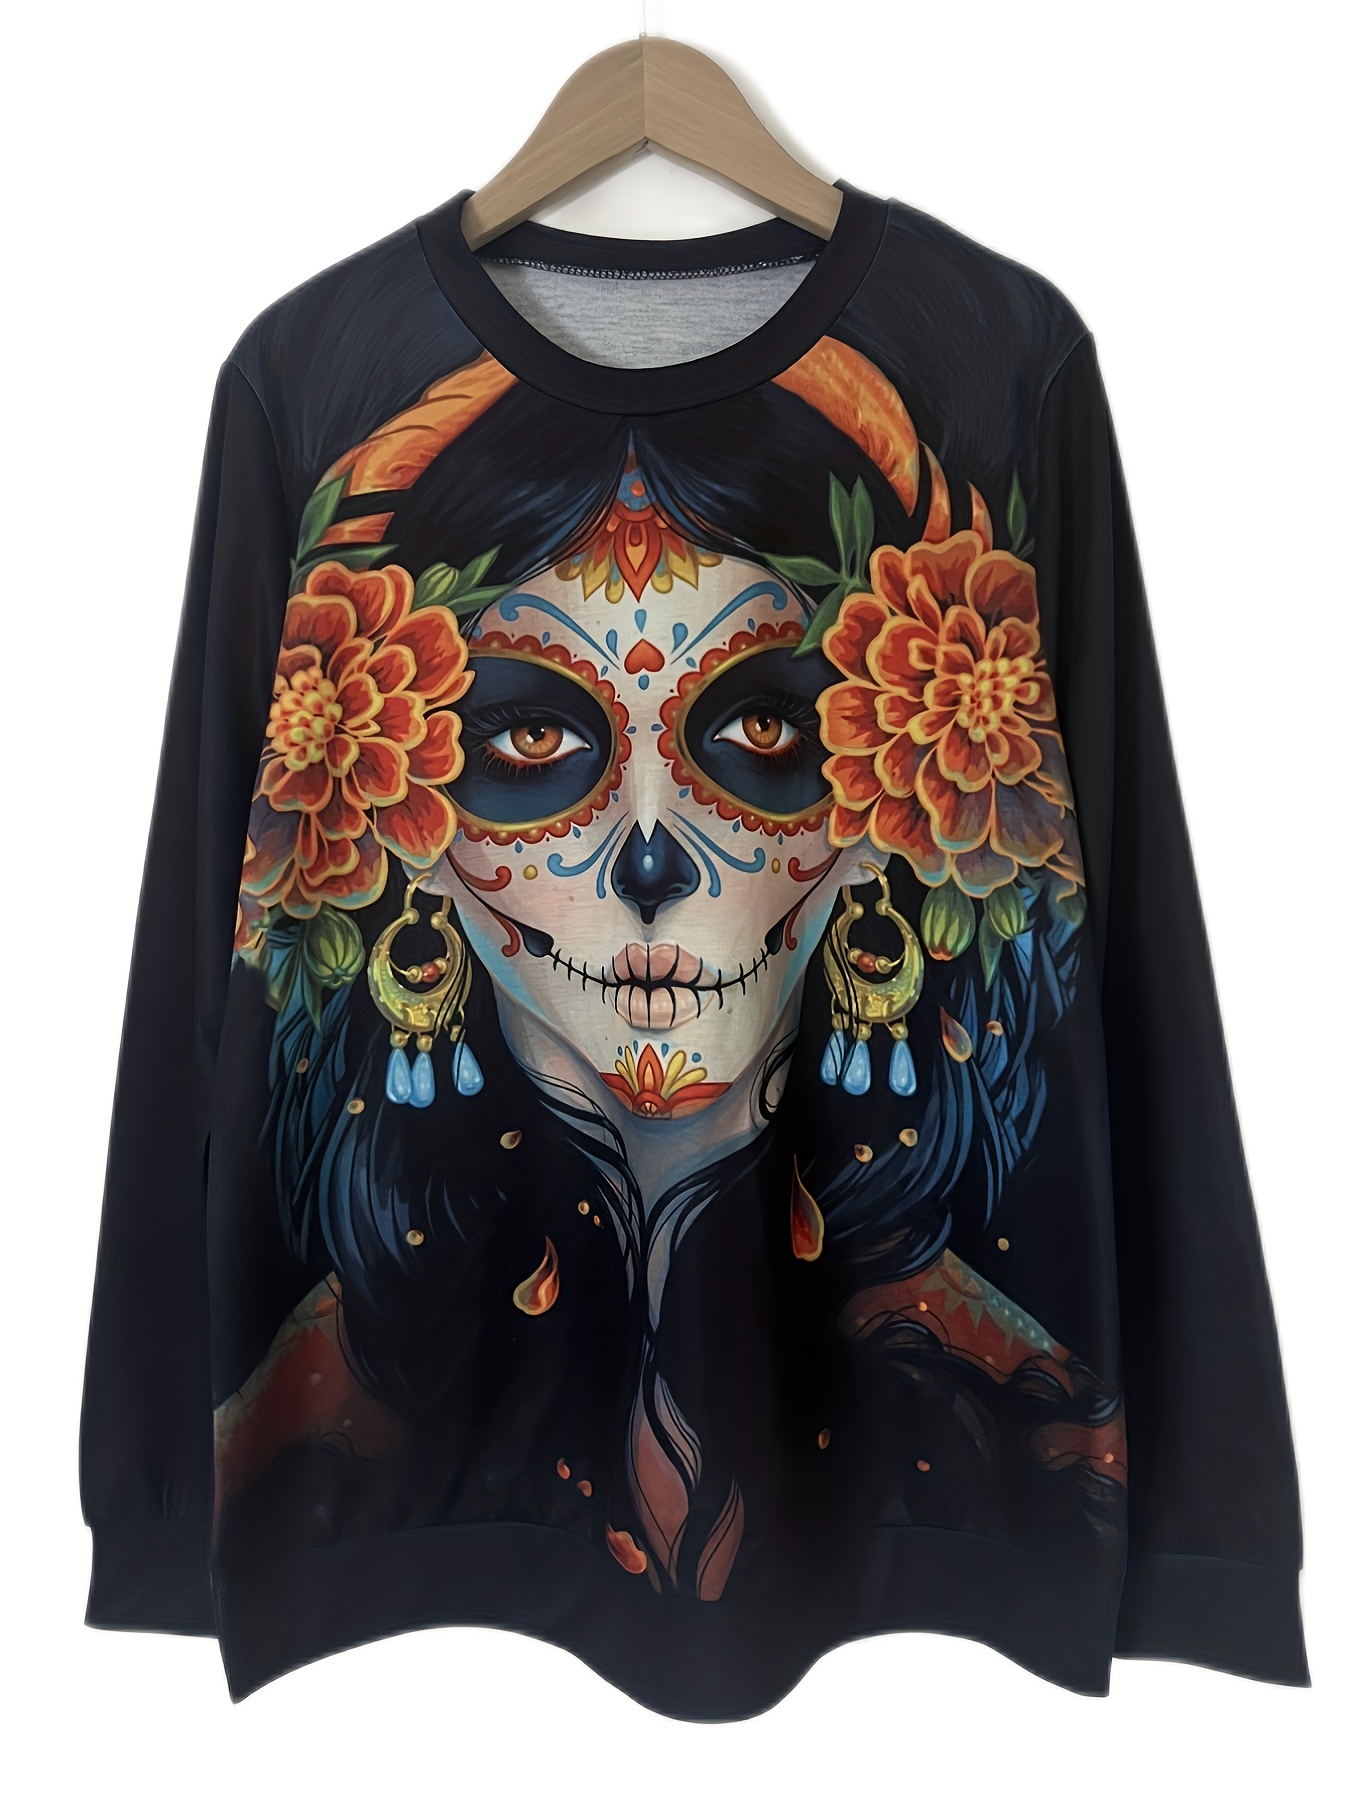  YFJRBR daily deals of the day prime today only I'm Ok It's Not  My Blood Womens Printed Casual Long Sleeve Sweatshirt Halloween Shirts For  Women Plus Size Hoodies deals : Clothing